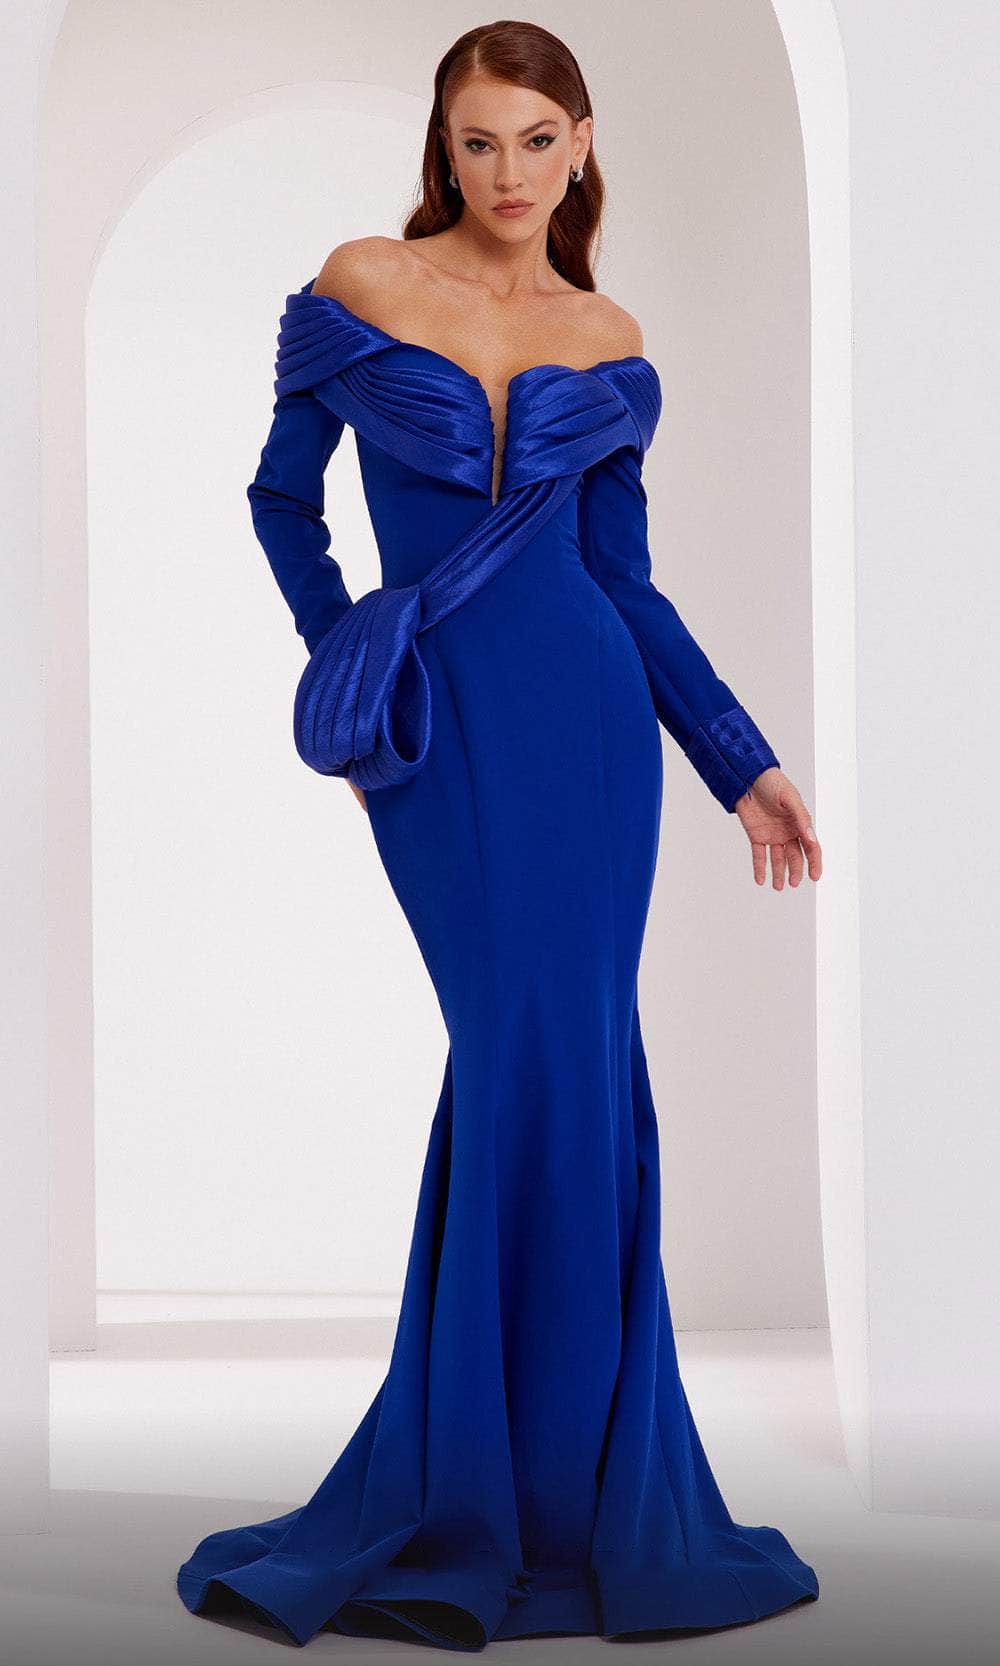 MNM COUTURE 2791 - Crepe Mermaid Gown 4 / Blue